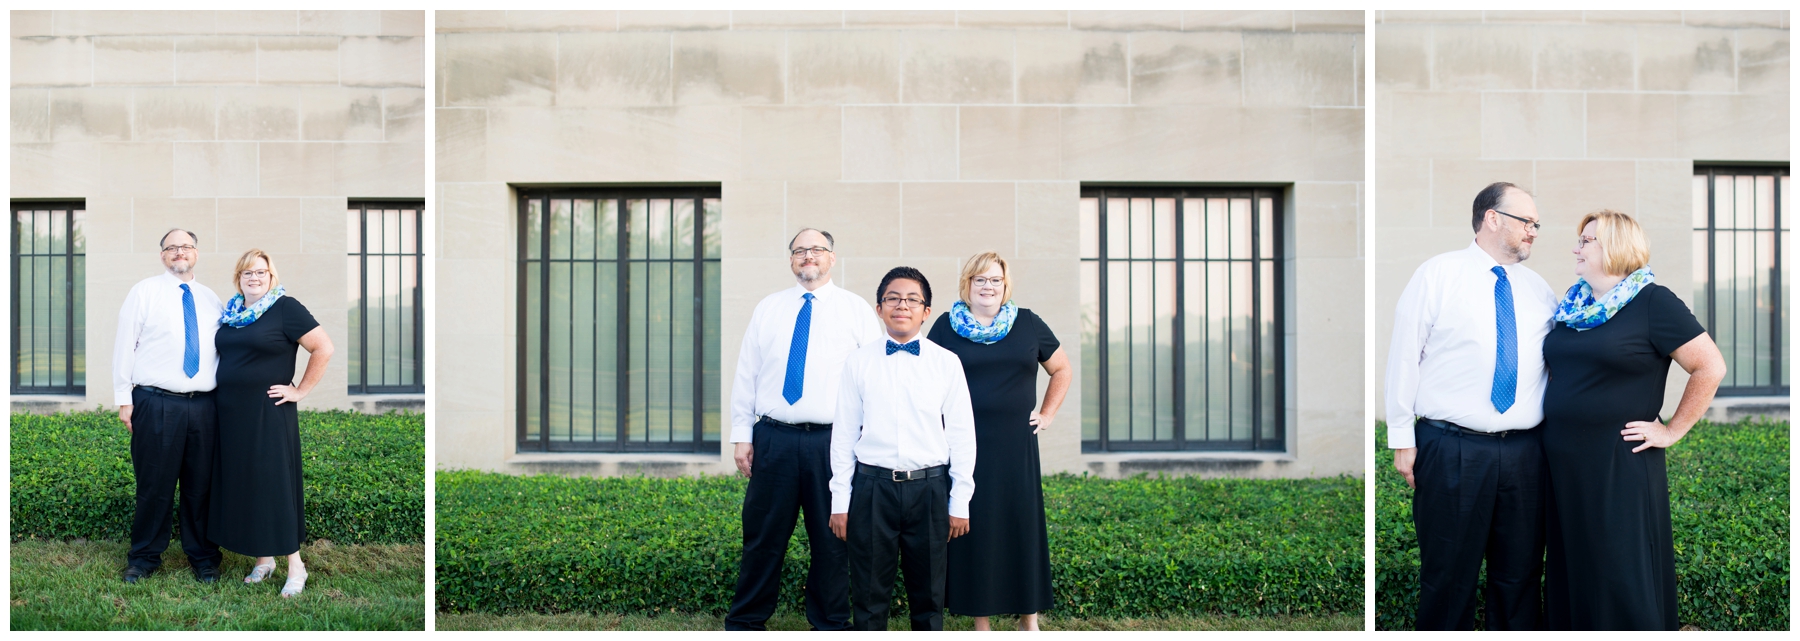 classy-bowtie-family-session-at-nelson-atkins-museum-by-lacey-rene-studios-photography_0011